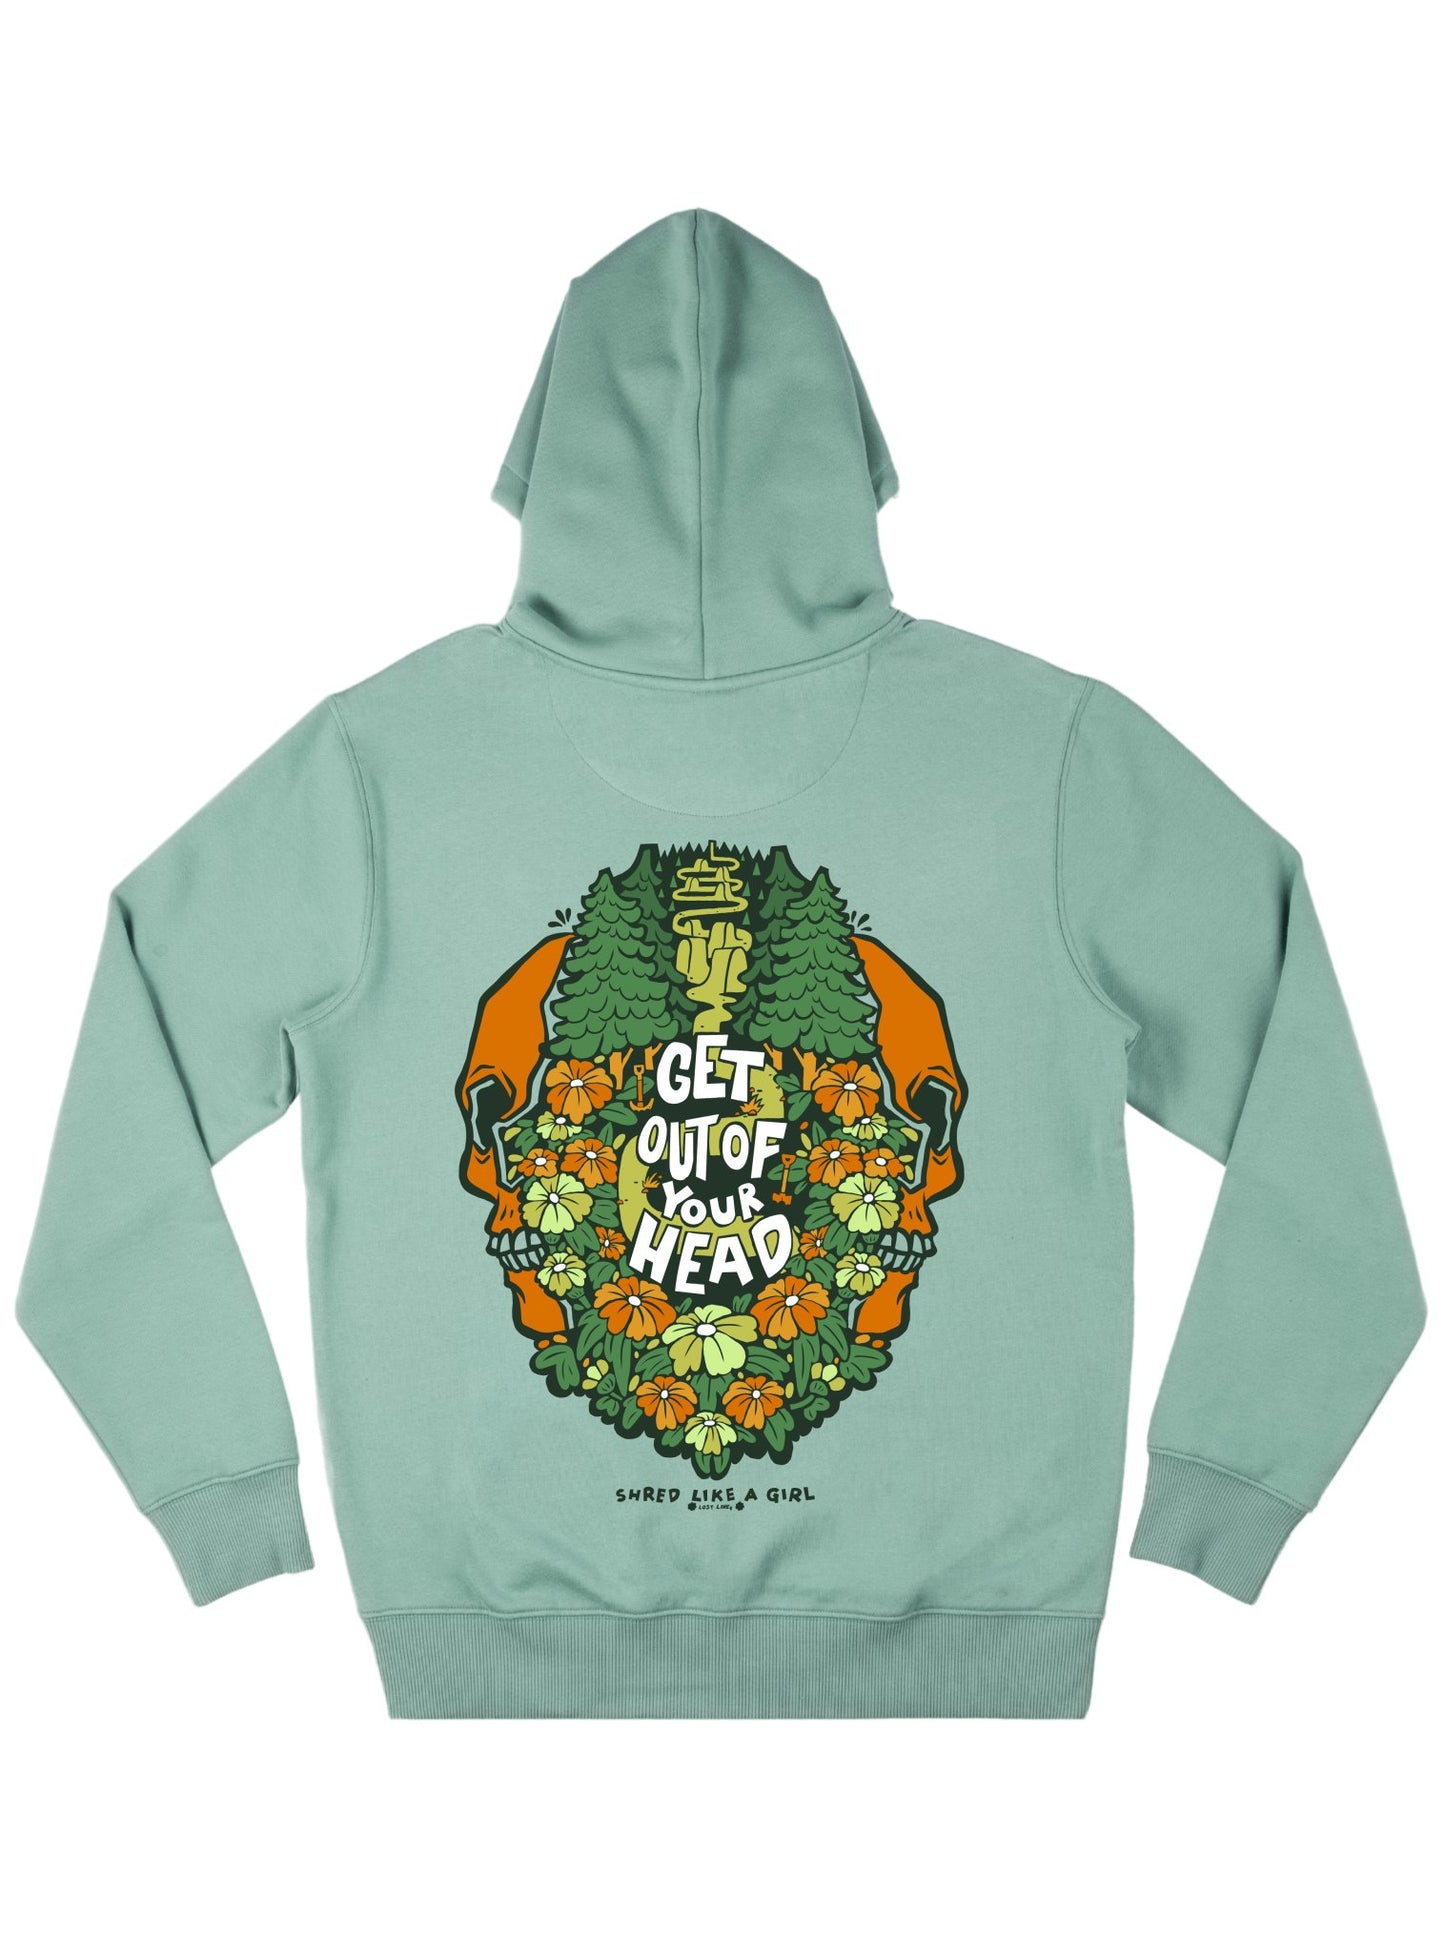 Get out of your Head Hoodie - Shred Like a Girl